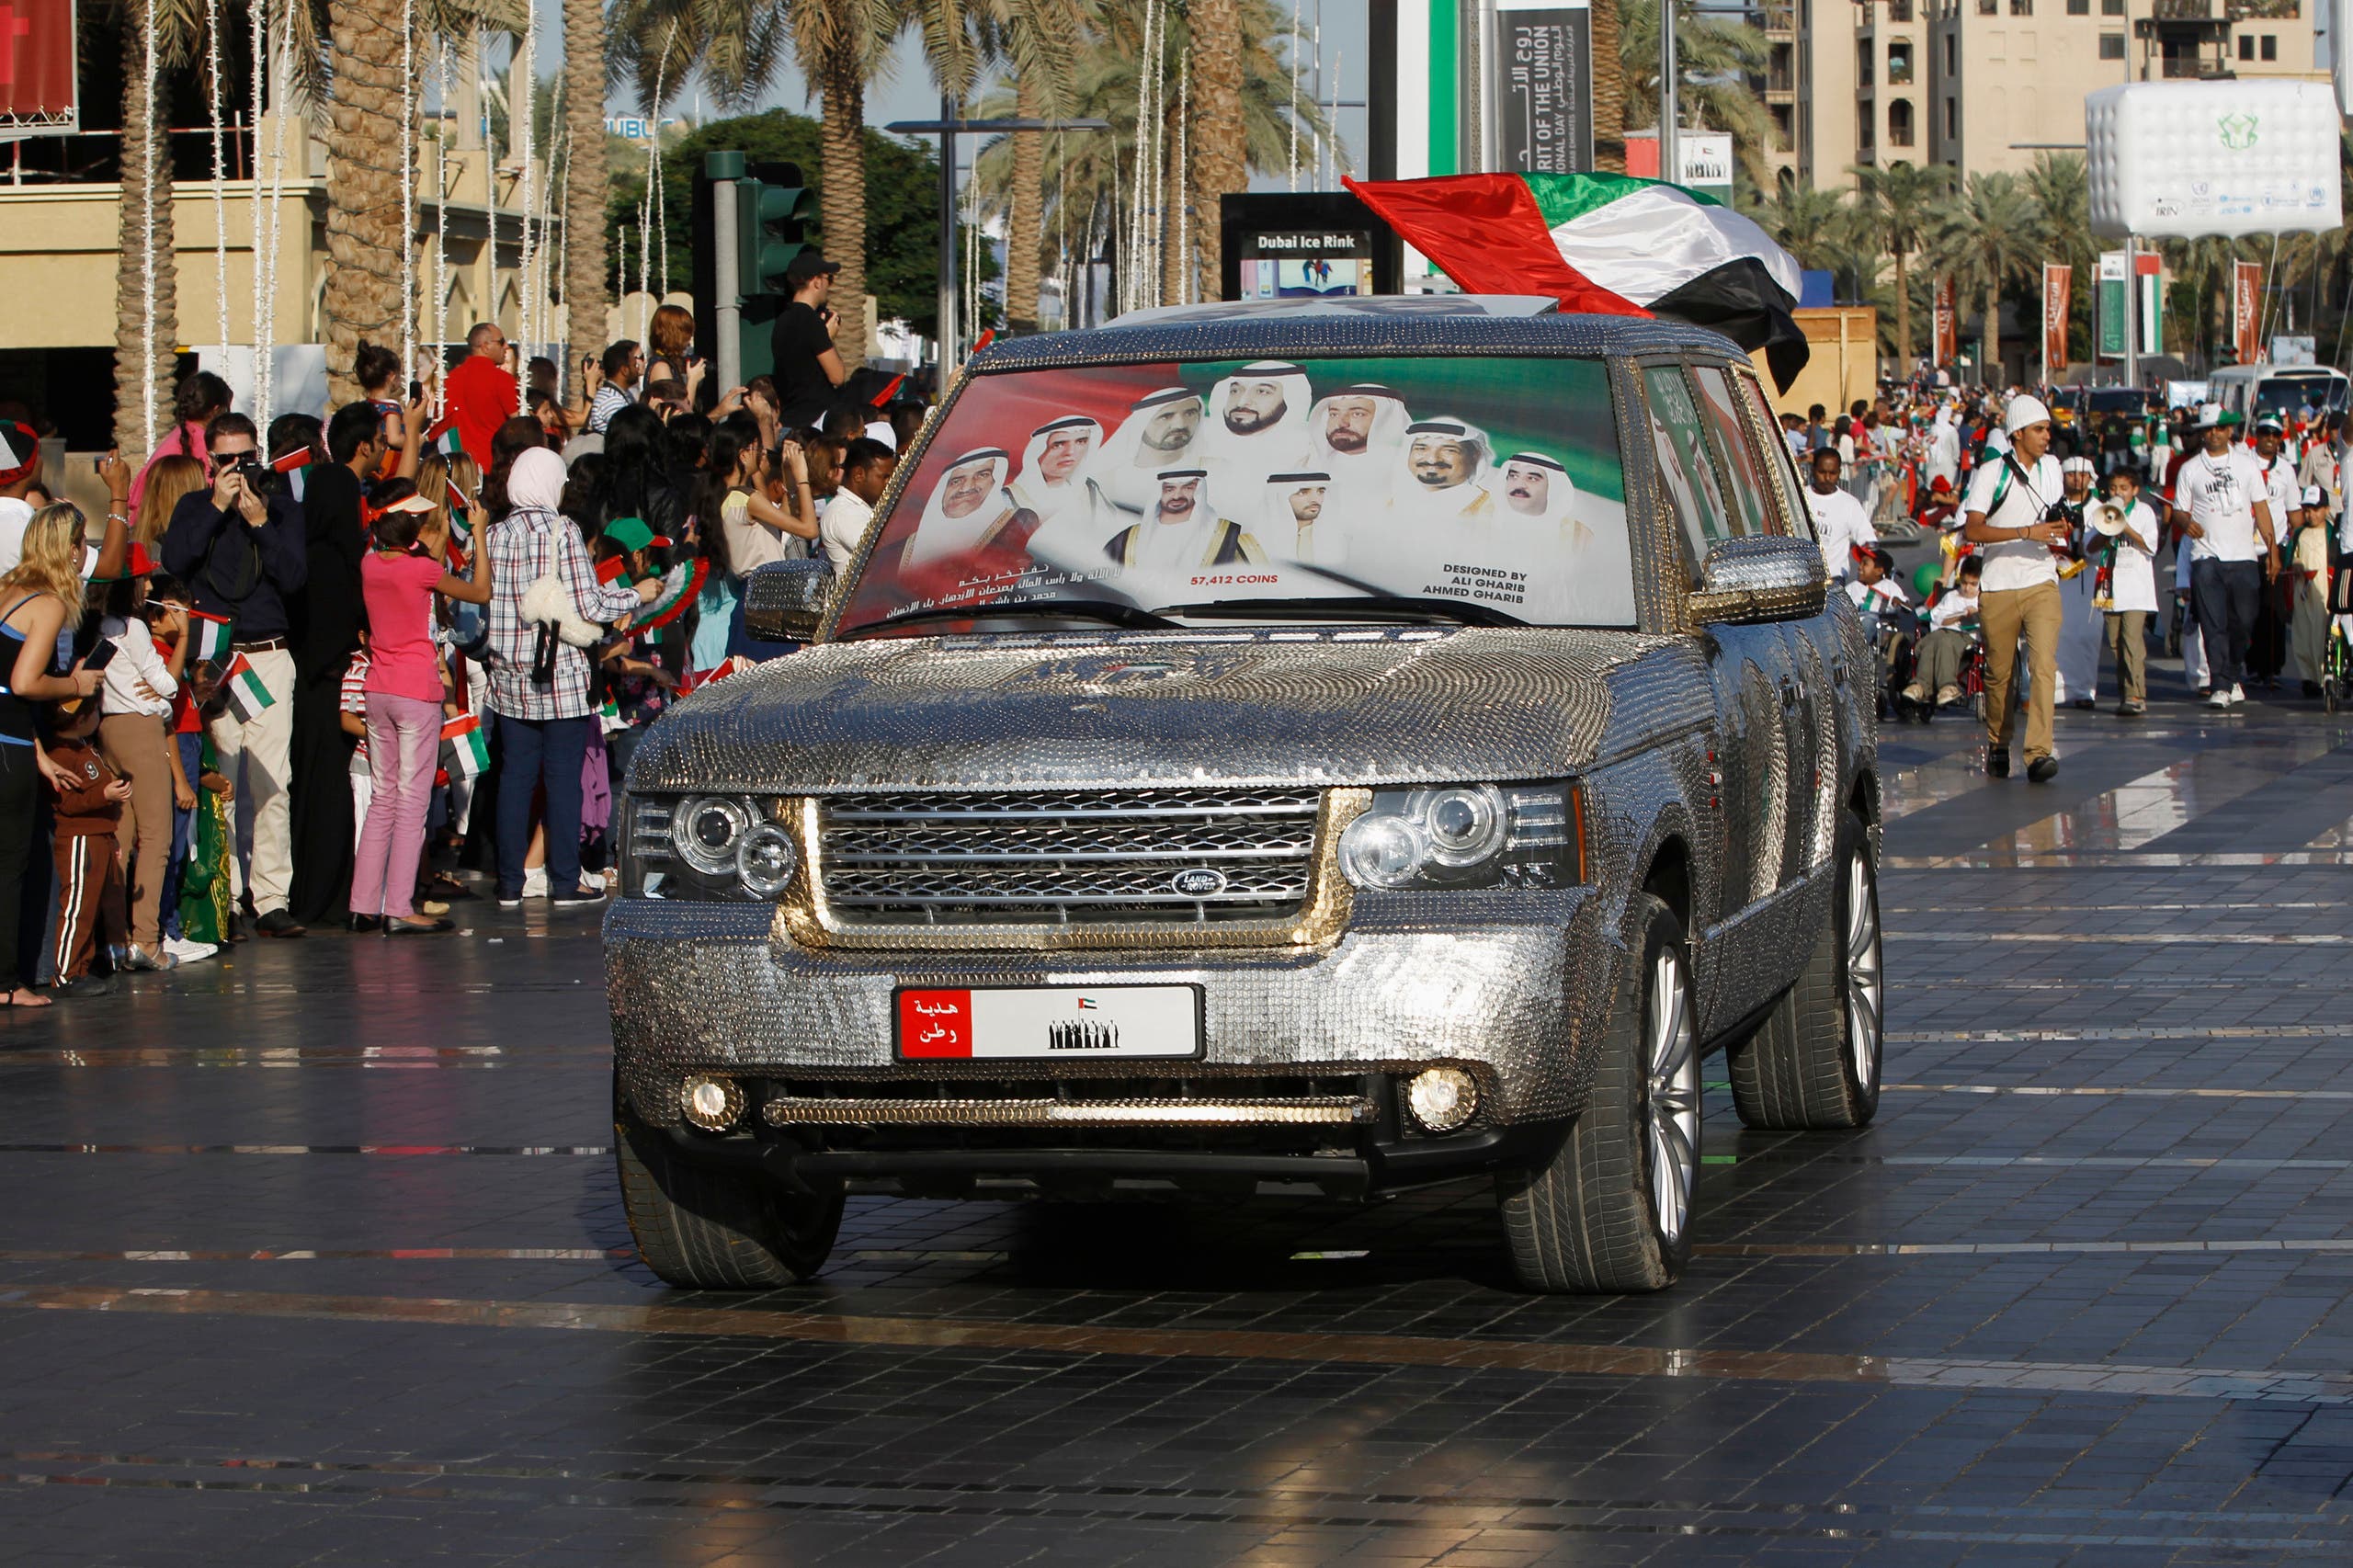 Pictures of President Khalifa and PM Sheikh Mohammed are printed on windscreen of car during parade celebrating 41st National Day of the United Arab Emirates, in Dubai. (Reuters)